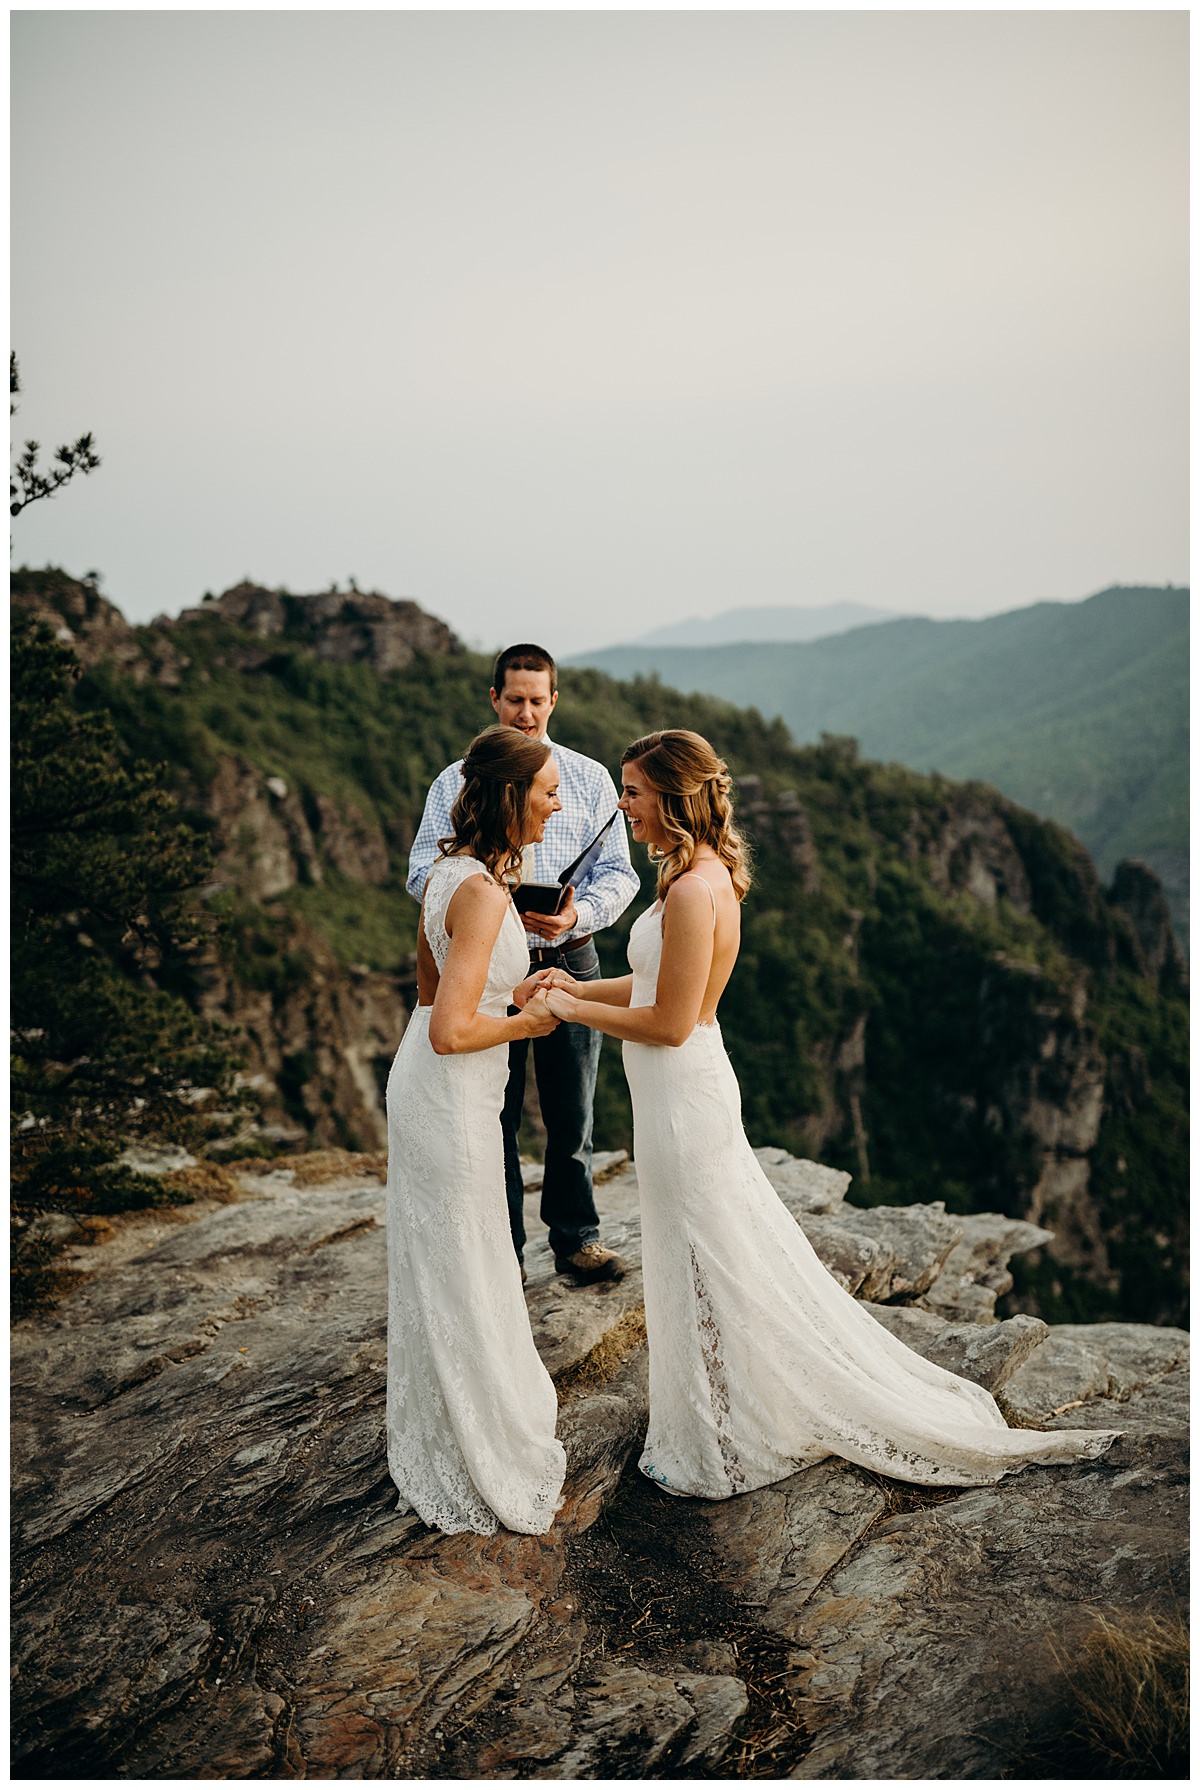 An adventure elopement ceremony at The Chimneys NC with the officiant and two brides.